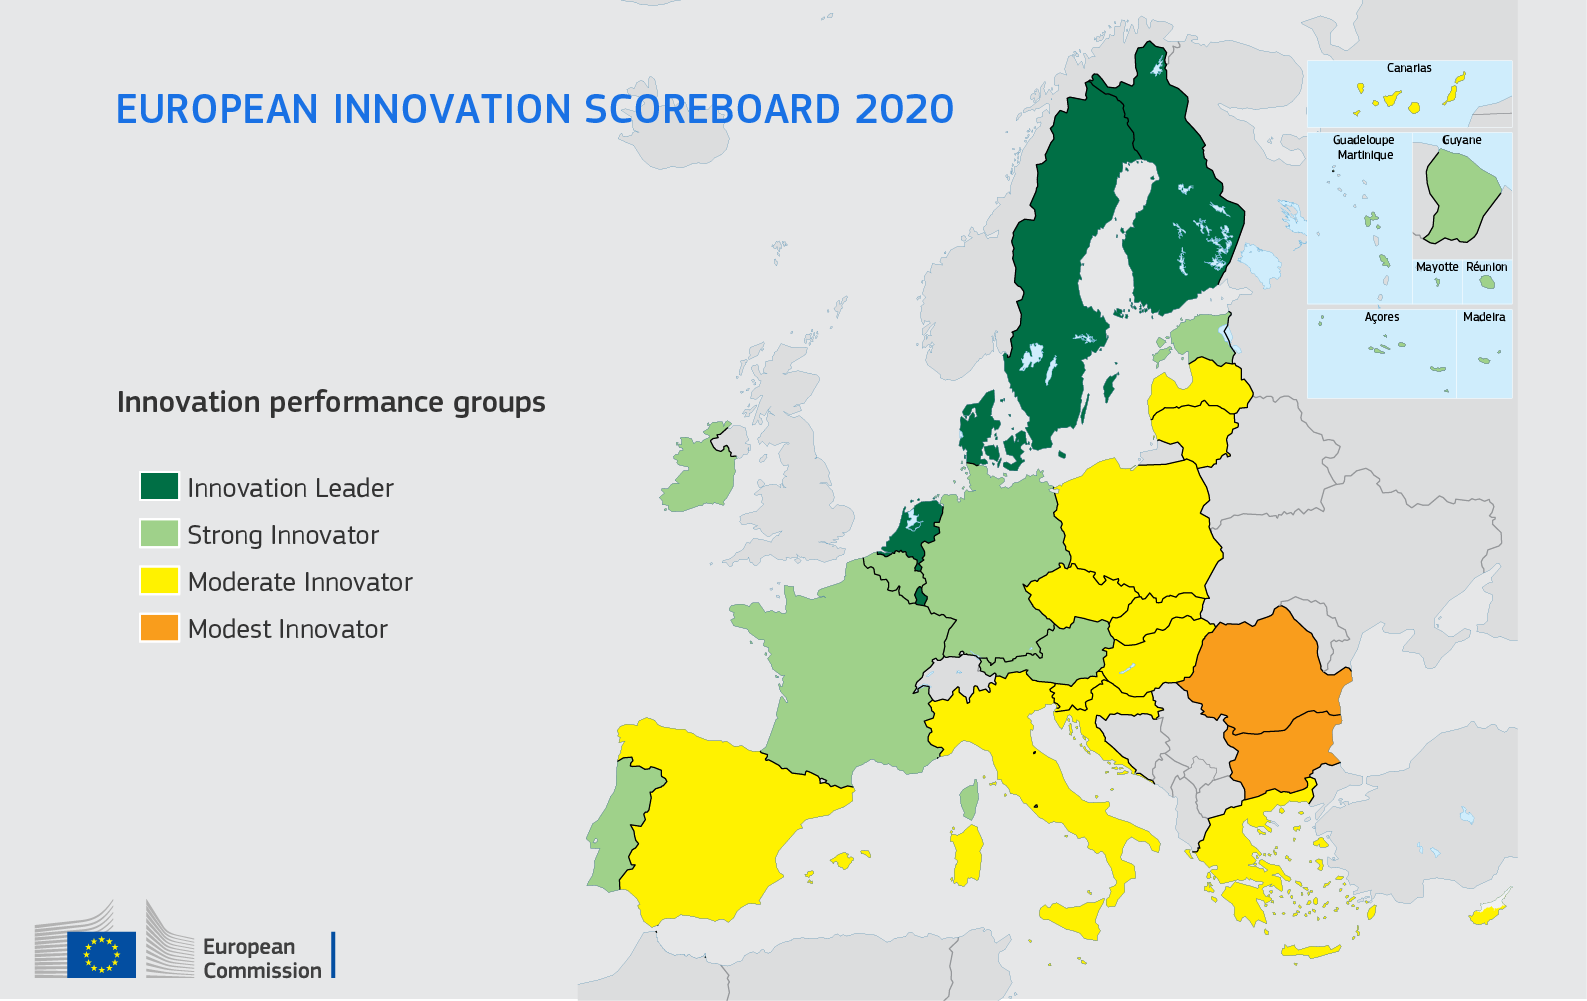 A map of Europe showing the innovation performance groups from the 2020 innovation scoreboard.